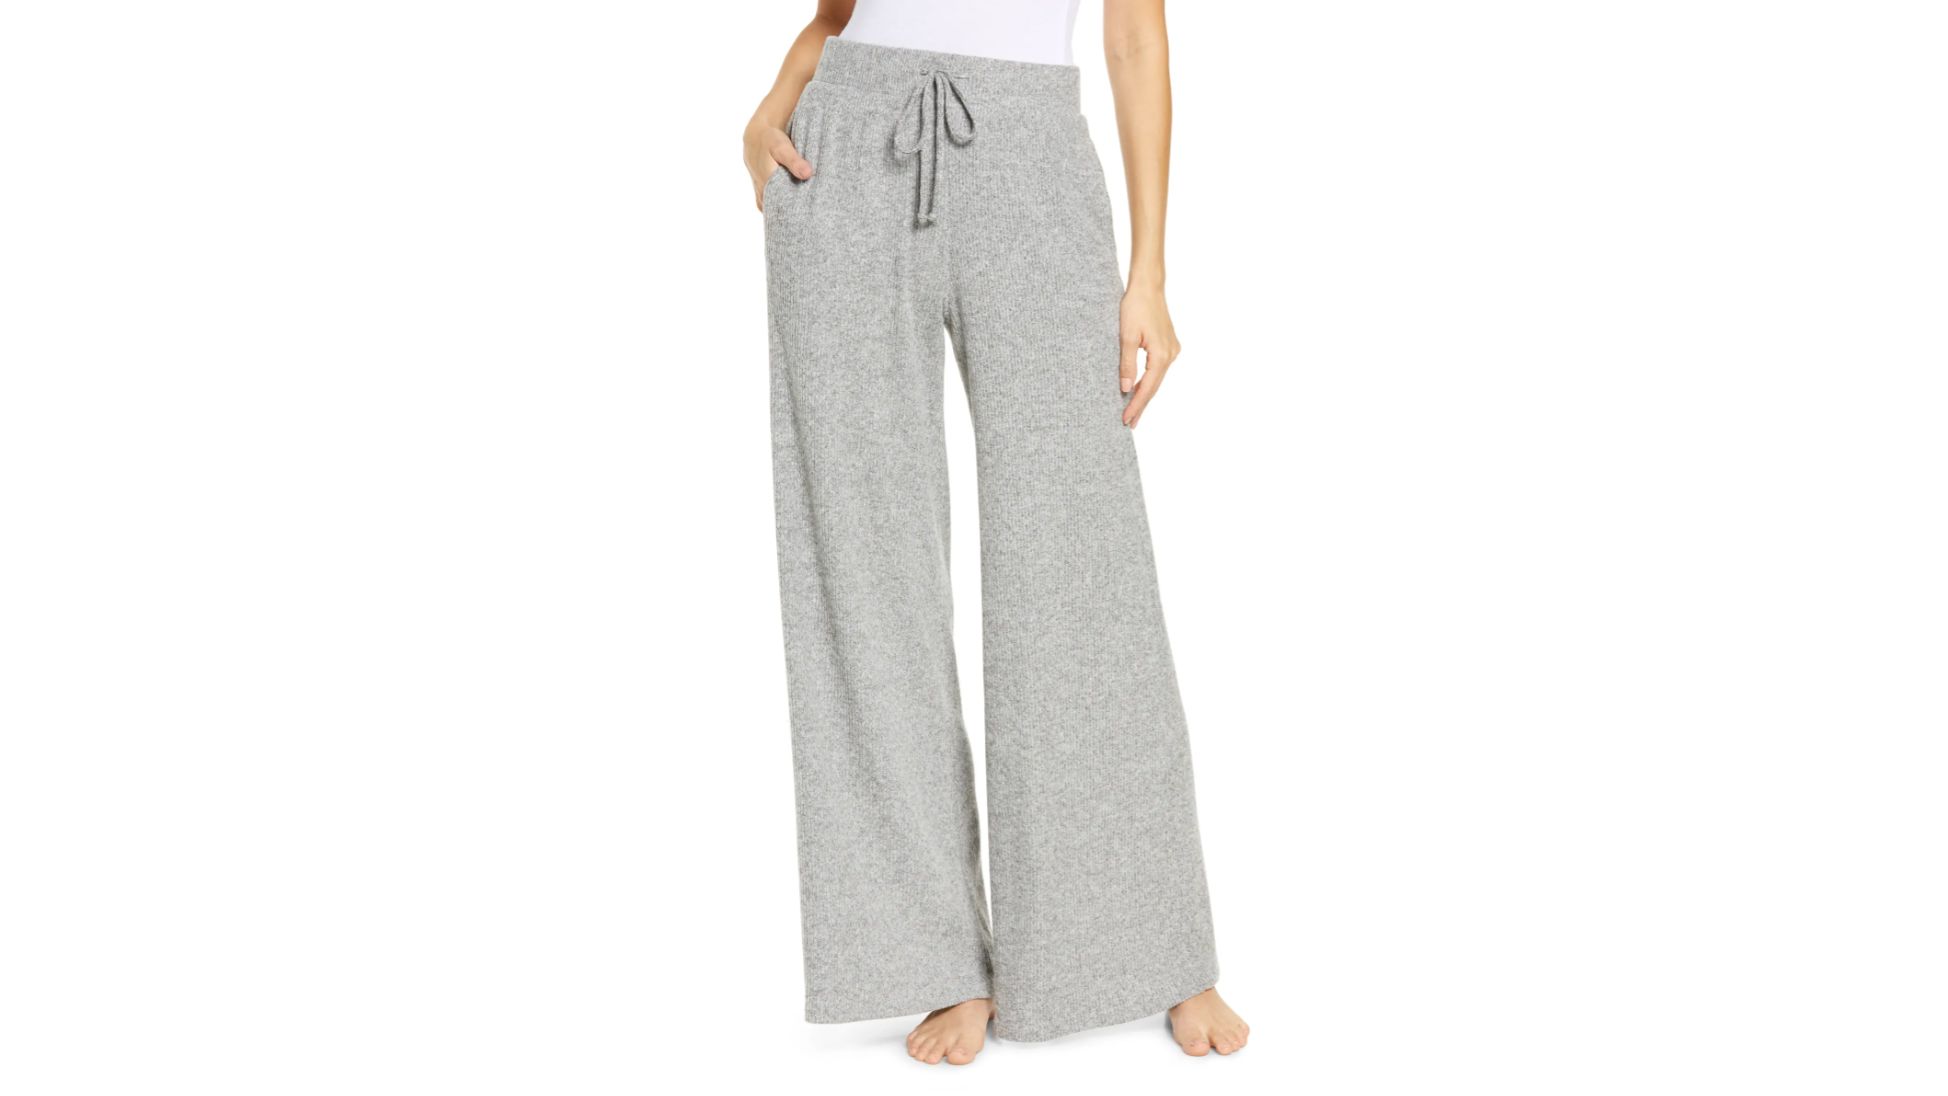 Best lounge pants, according to experts